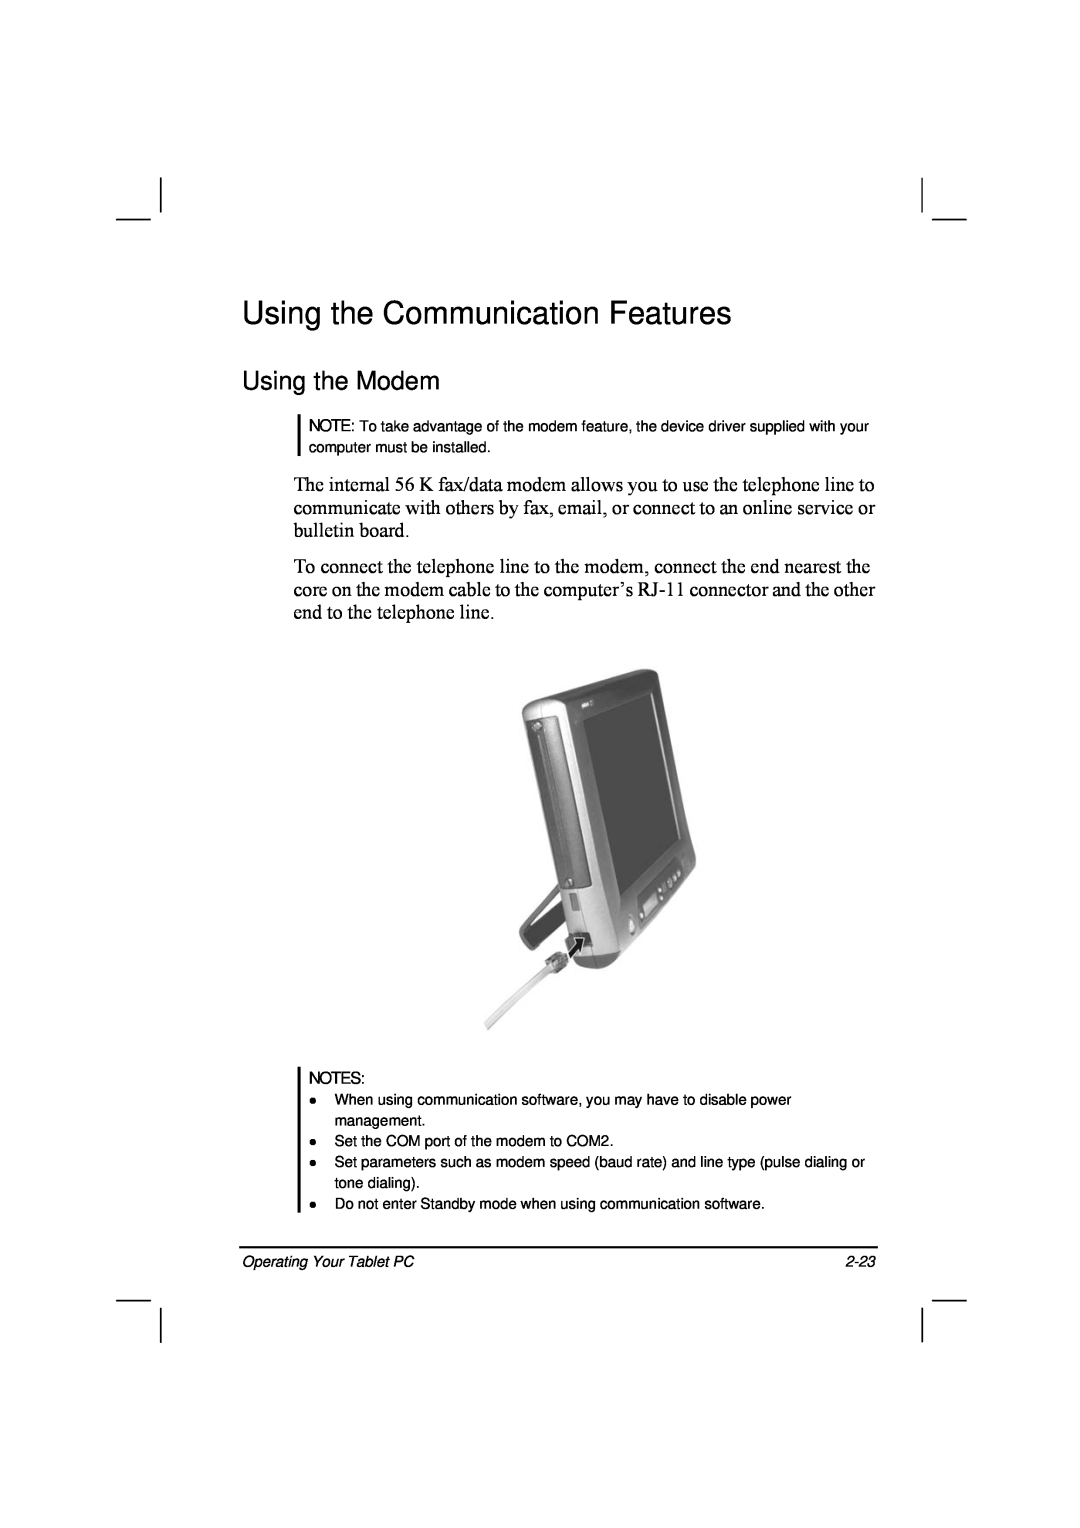 TAG 20 Series manual Using the Communication Features, Using the Modem 